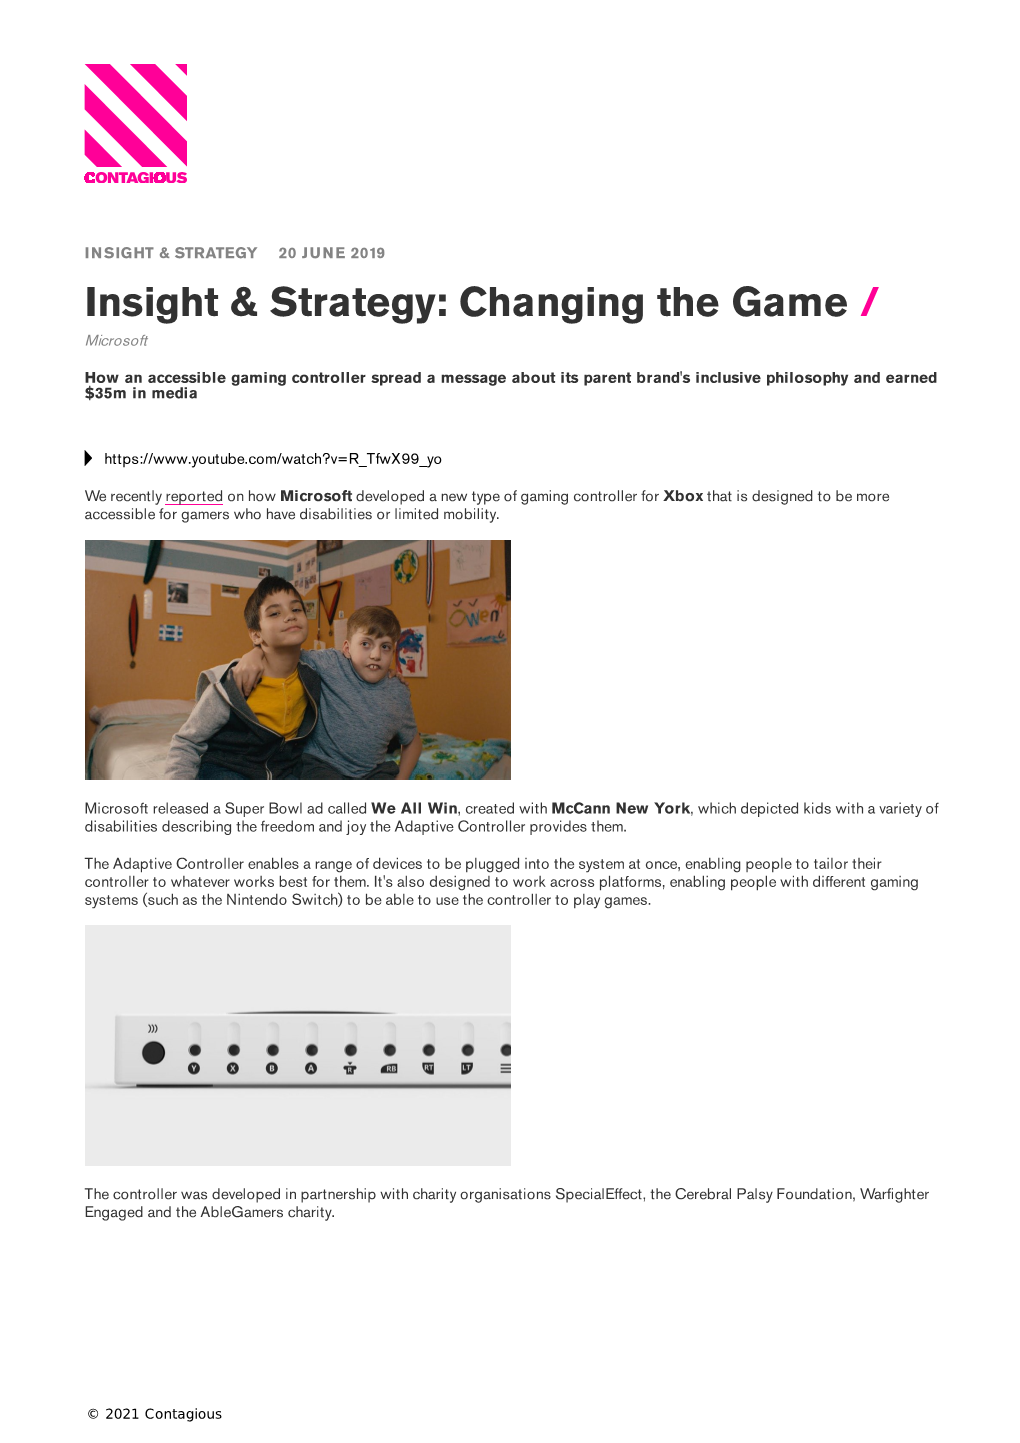 Insight & Strategy: Changing the Game